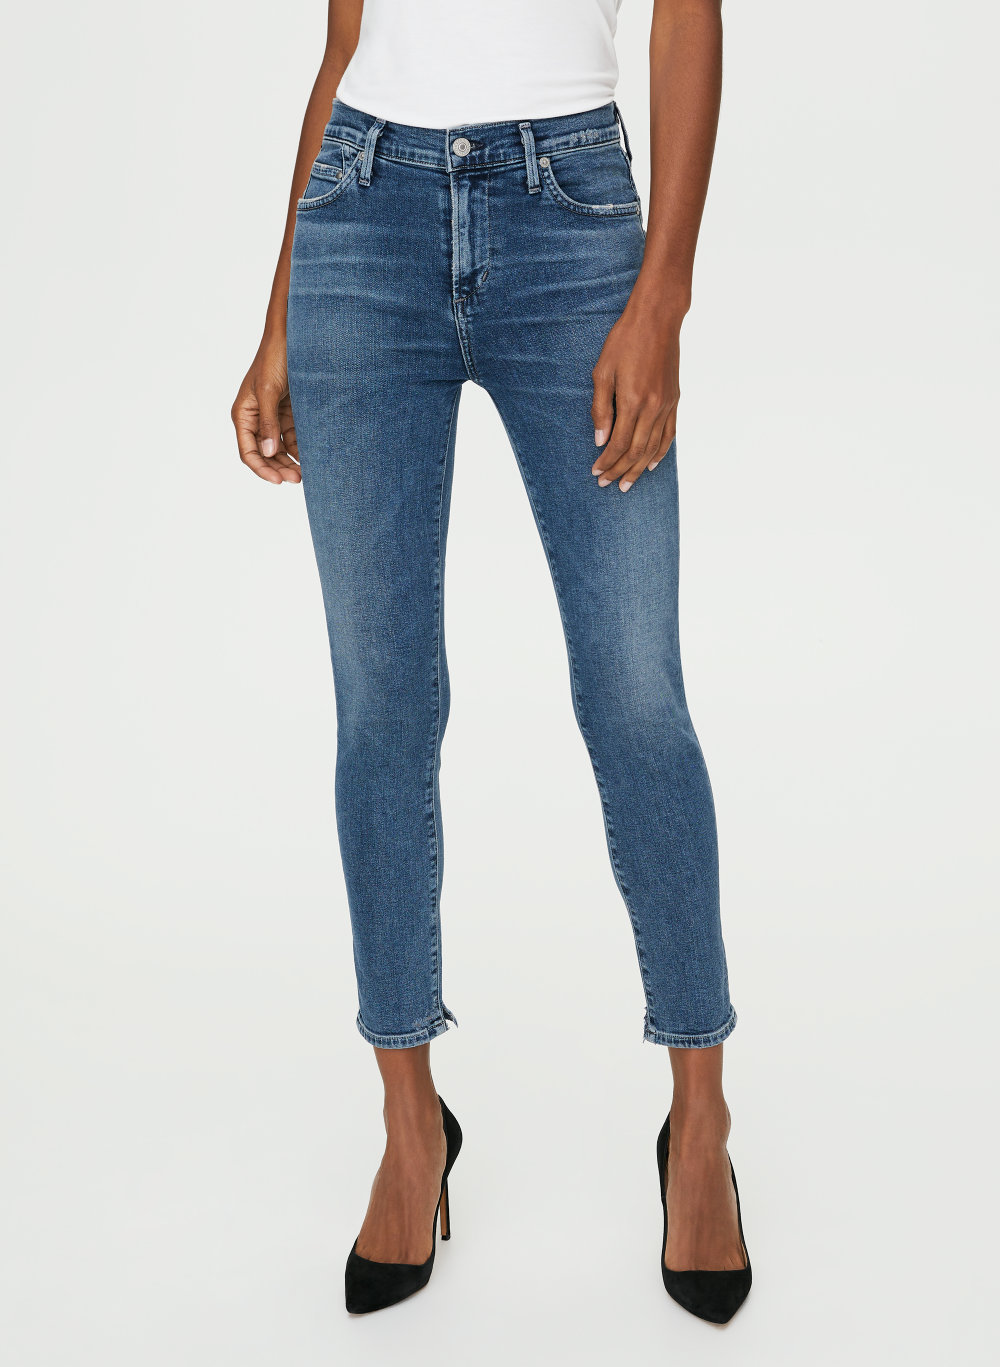 citizens of humanity rocket crop jeans